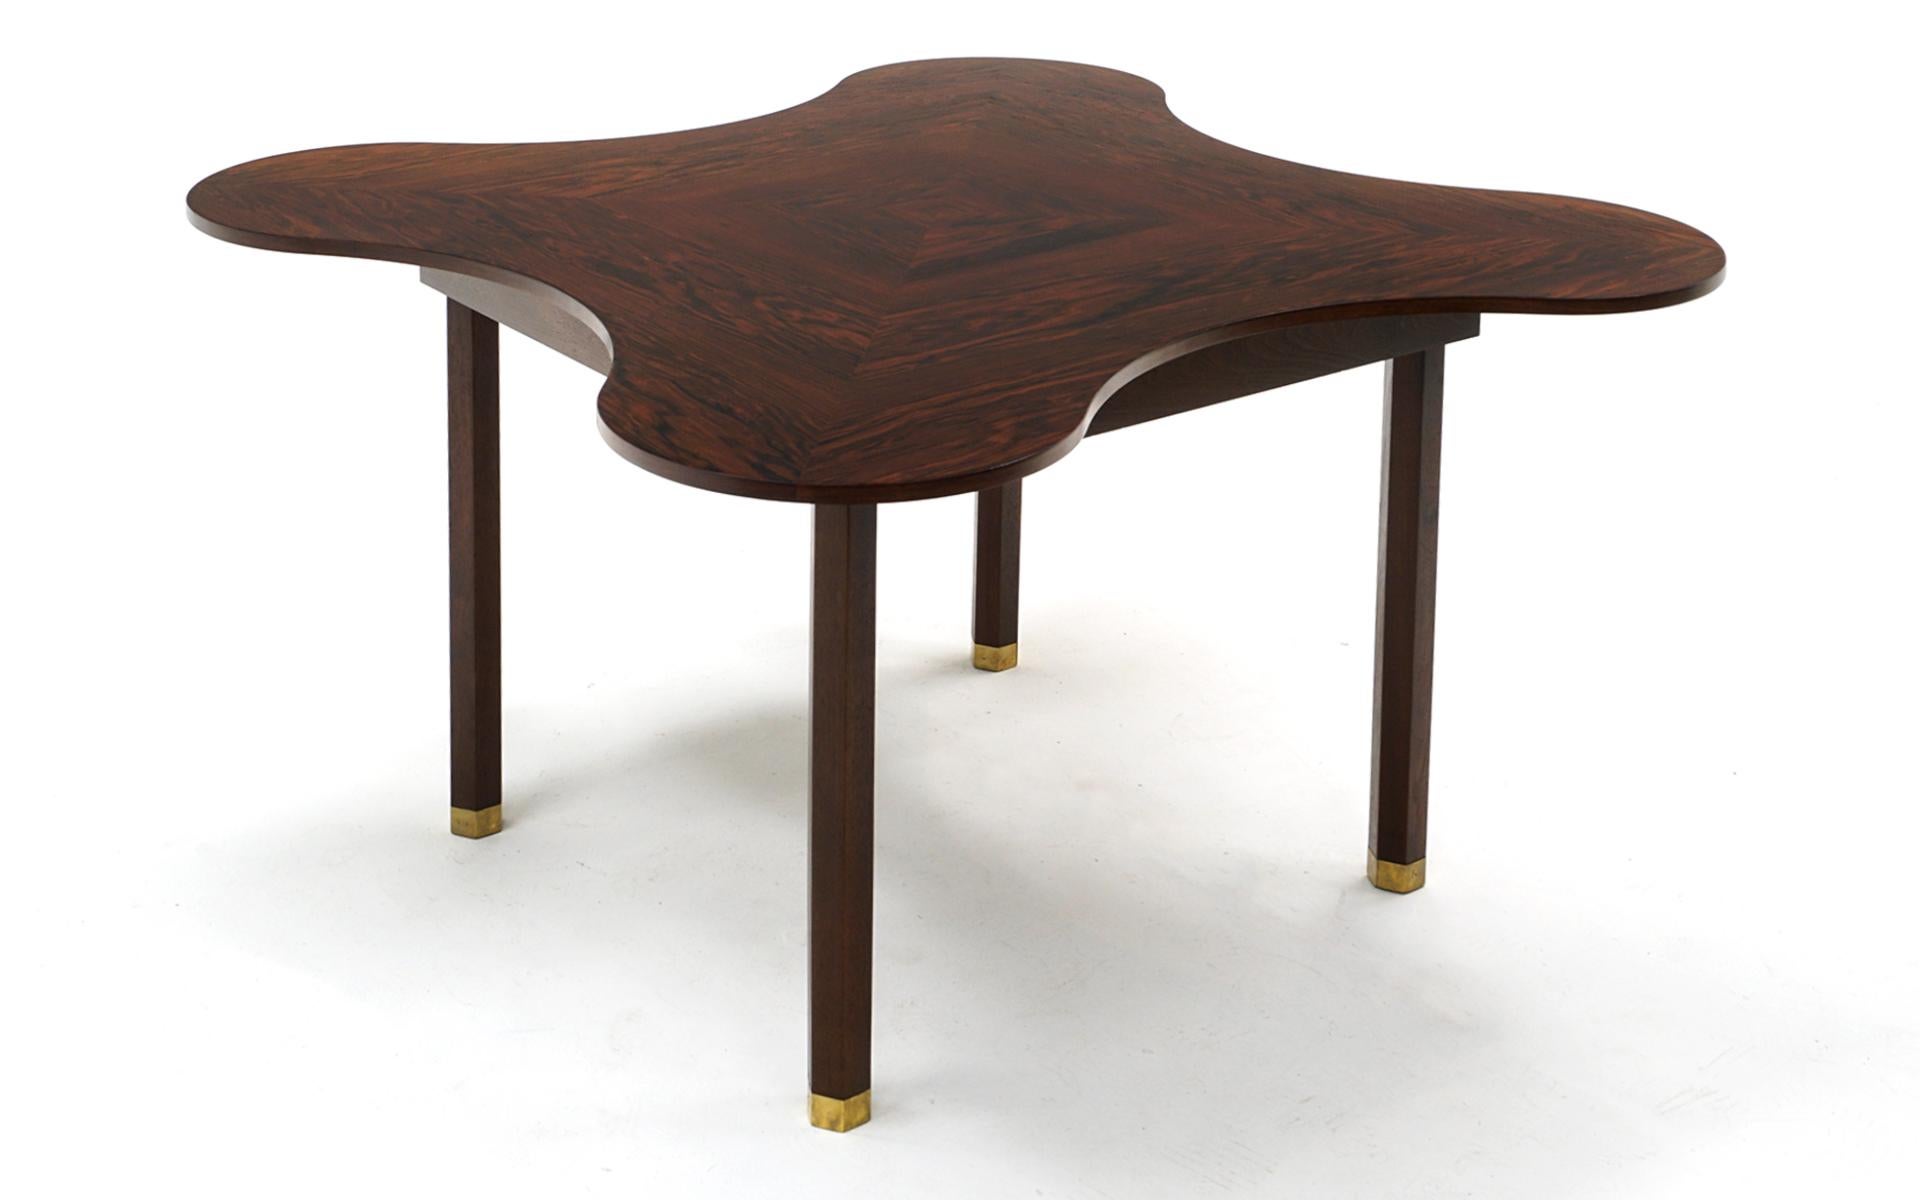 Rare Brazilian rosewood dining / center / game / kitchen table on hexagonal legs with brass feet designed by Edward Wormley for Dunbar circa 1950s. Unique organic clover-like shape. This has been expertly restored and refinished. The grain patterns